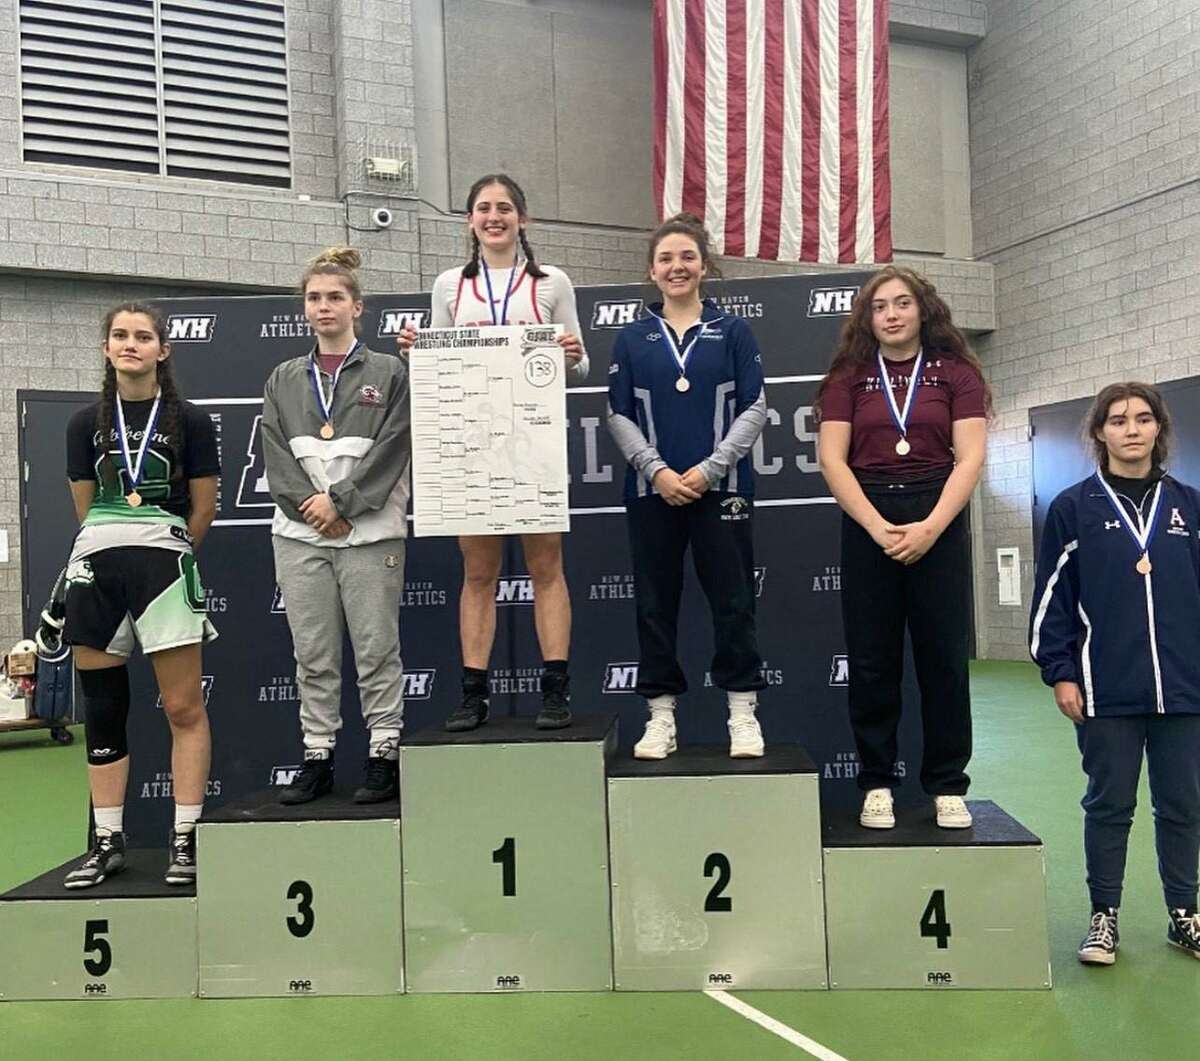 Kelly Asparas won the title at 138 pounds at the CIAC Girls State Championship Tournament.